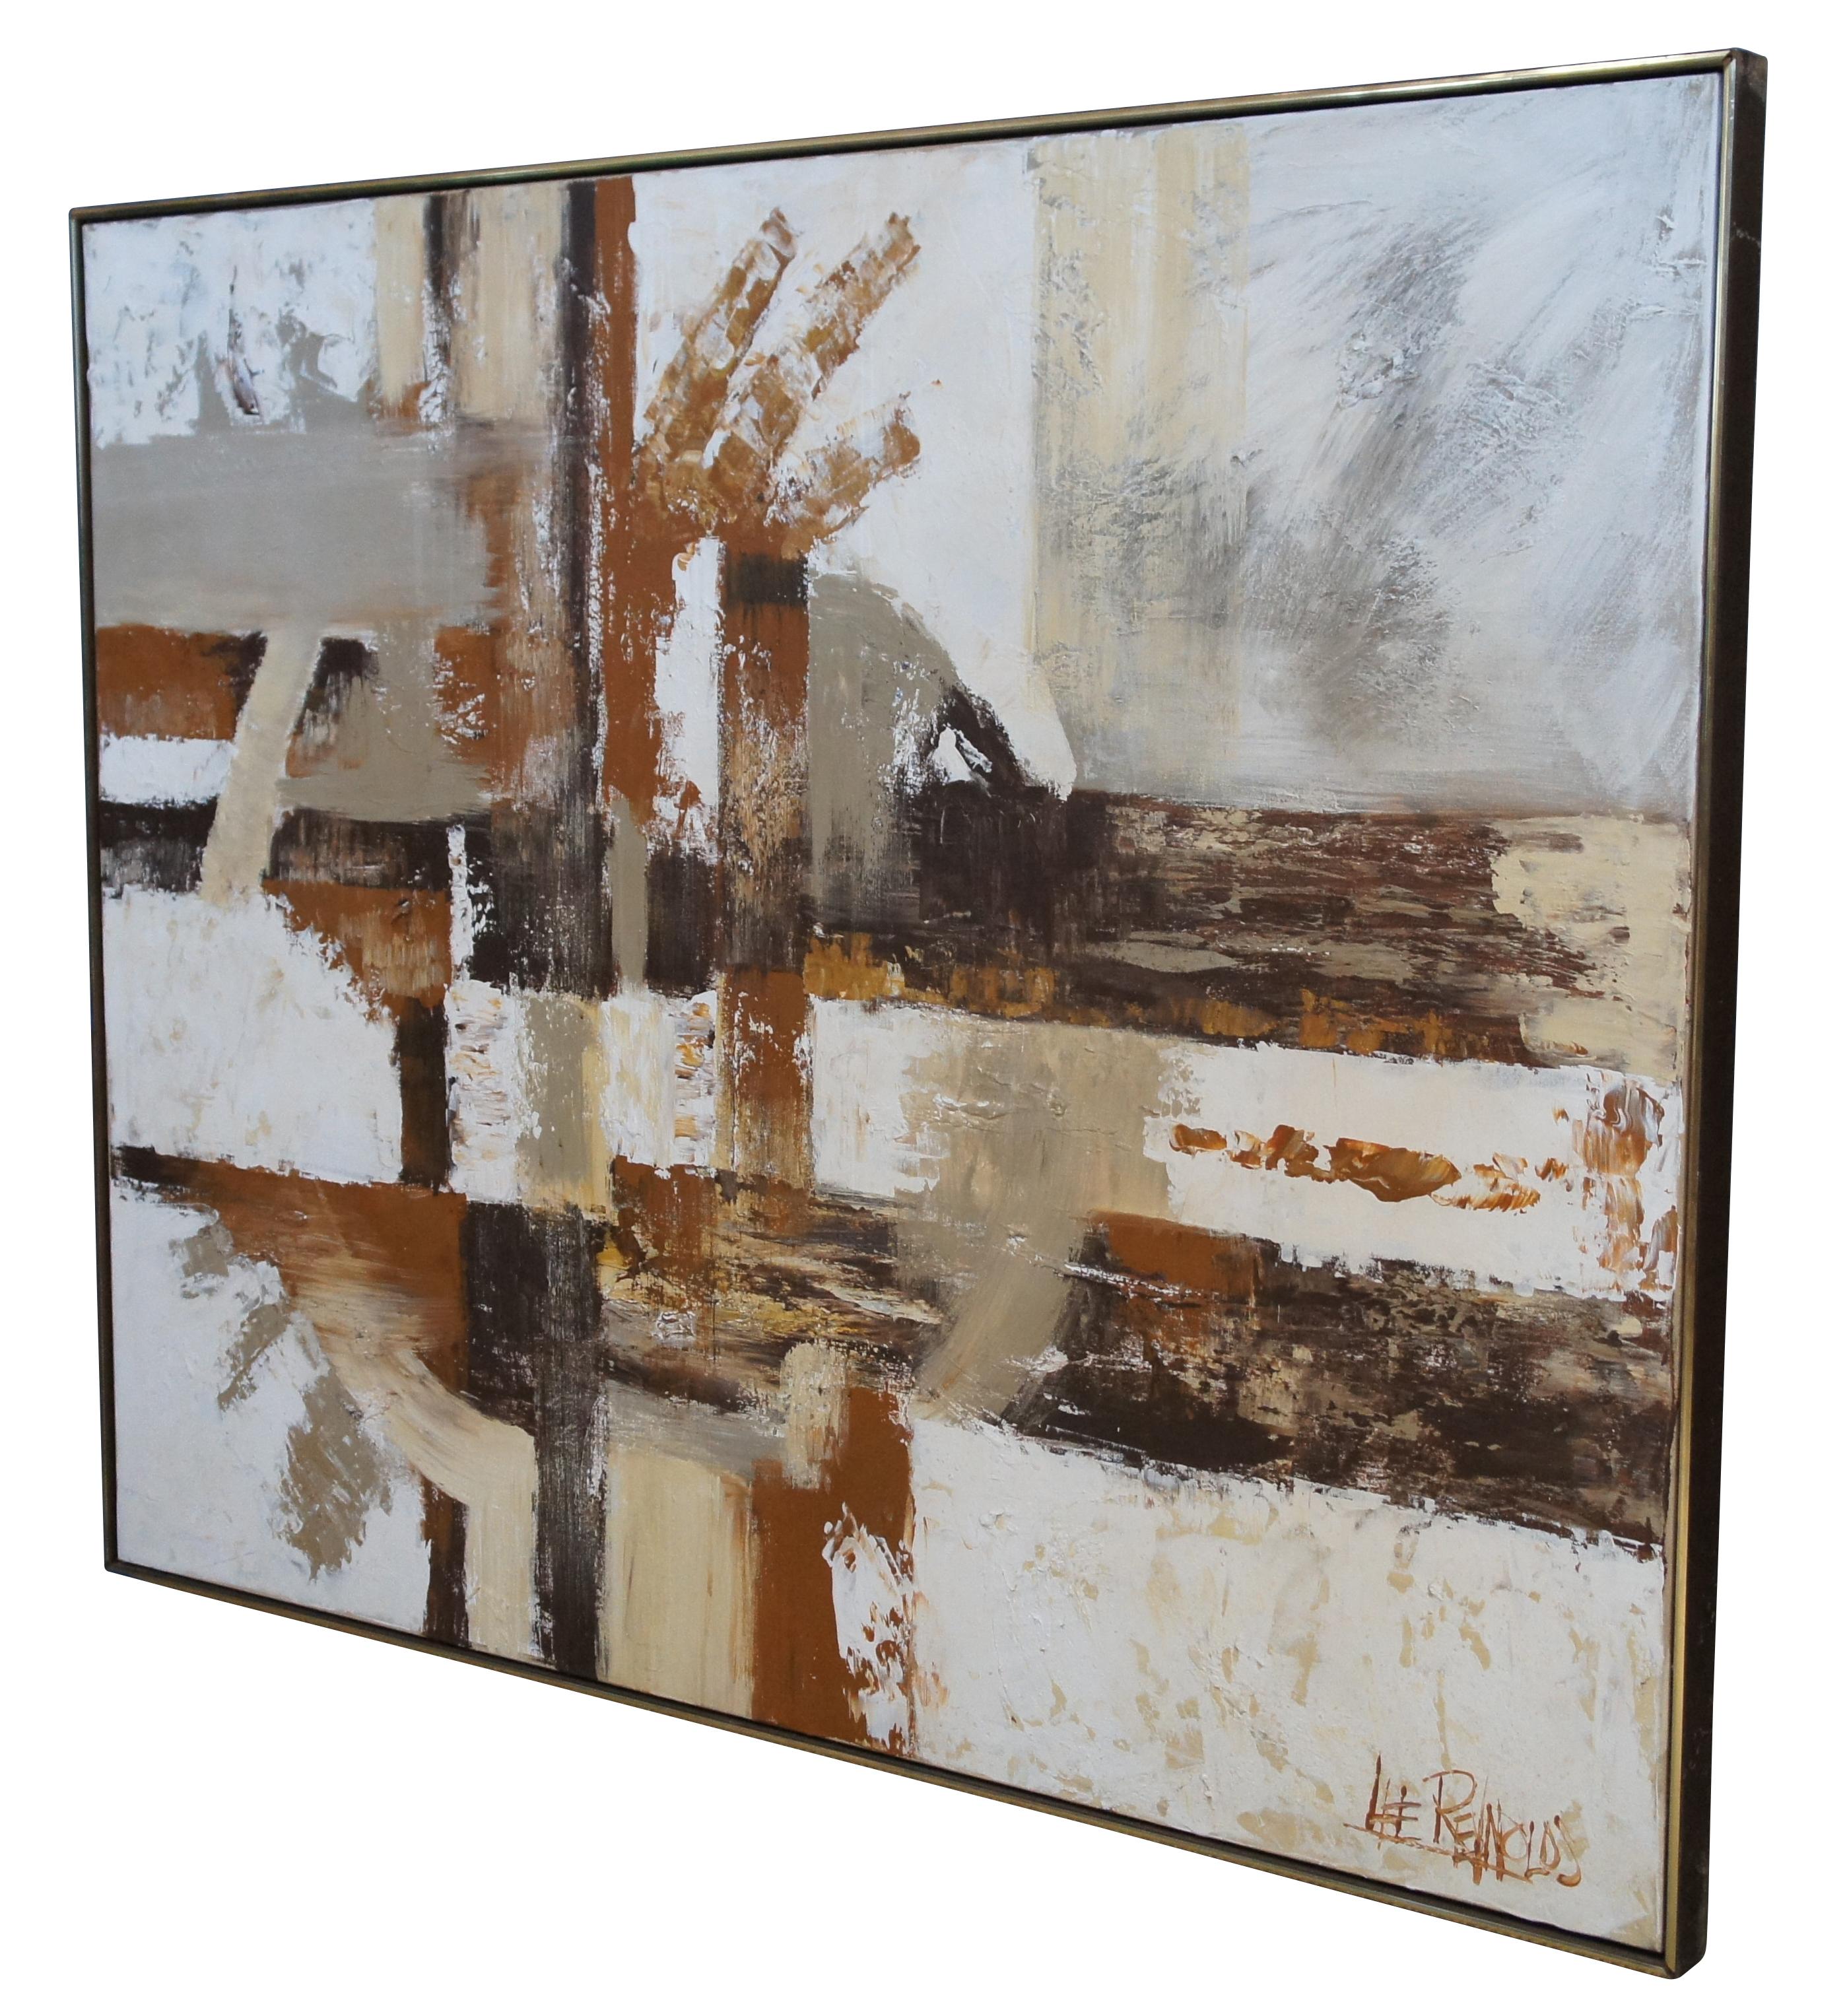 Large scale mid-20th century abstract oil painting on canvas signed Lee Reynolds, crafted in shades of brown and gray.

Lee Reynolds Burr opened his Vanguard Studios in Beverly Hills, California, in 1964 to make oil paintings an attainable